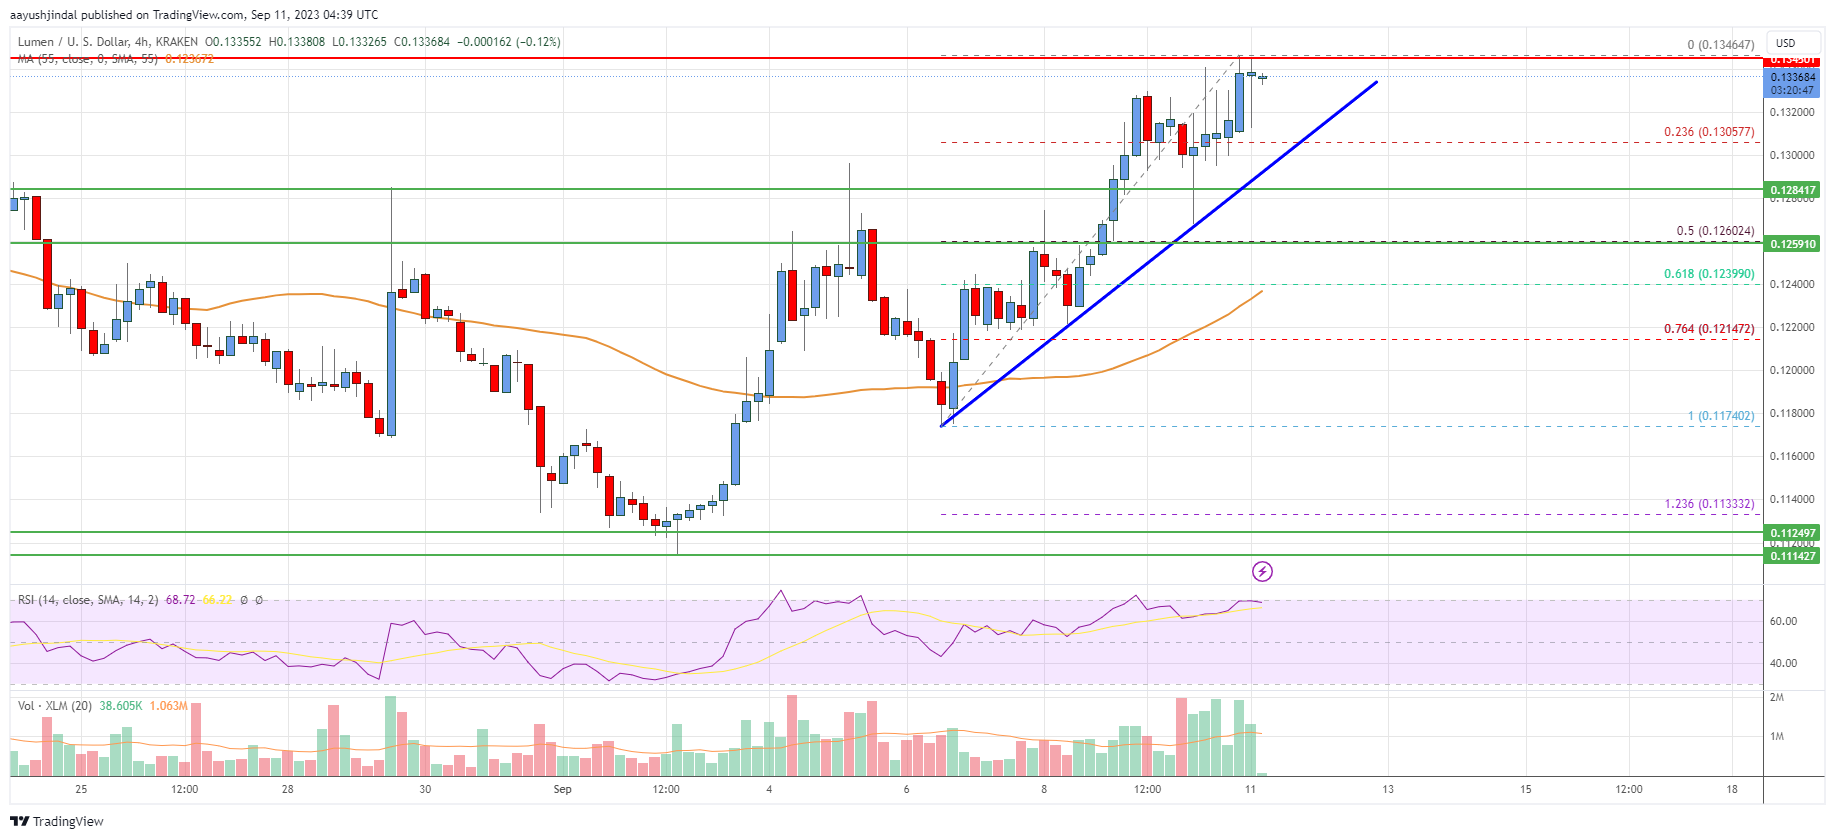 Stellar Lumen (XLM) Price Could Rally Further above $0.135